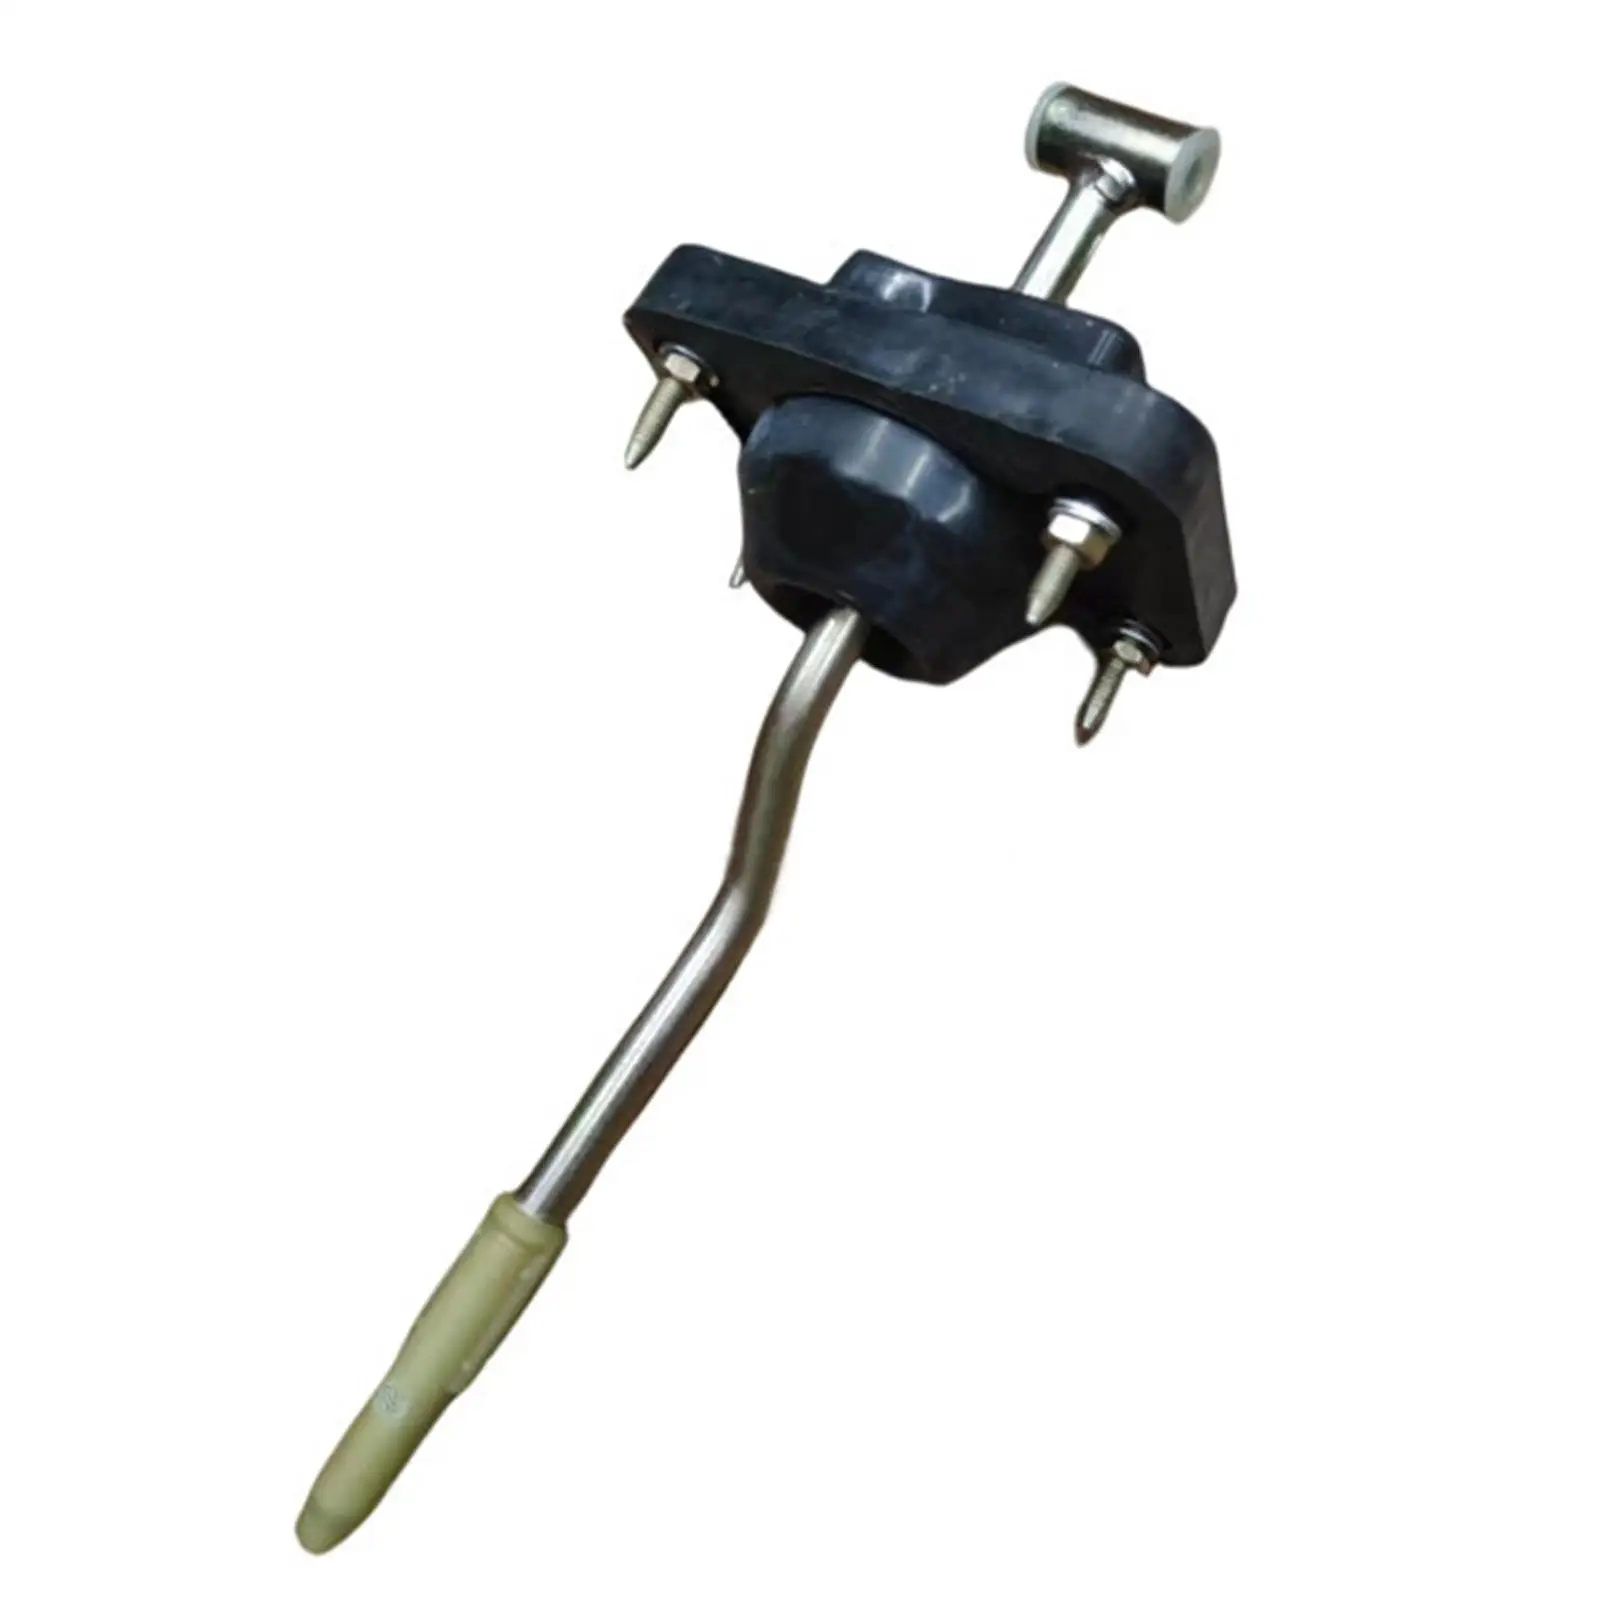 Gear Shift Lever Assembly Auto Accessories 2400H3 for Peugeot 206 207 Easy to Install High Reliability